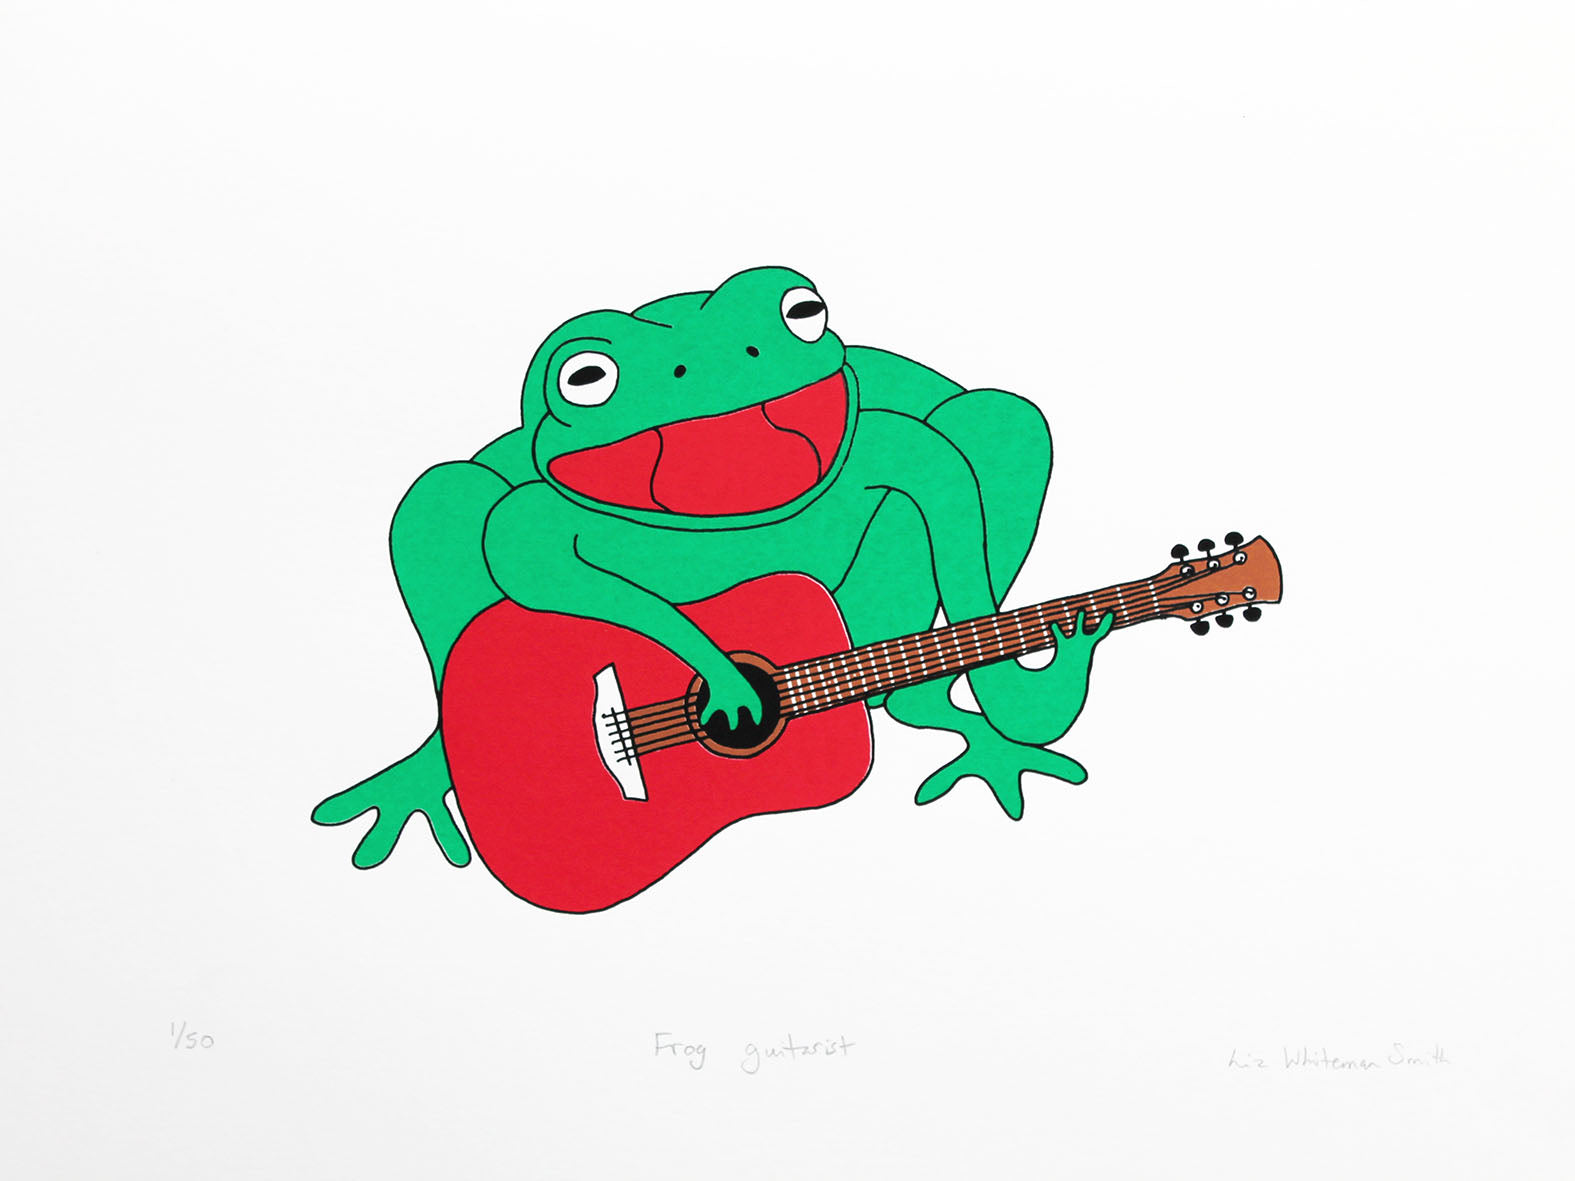 Screen print of a frog playing the guitar by Liz Whiteman Smith